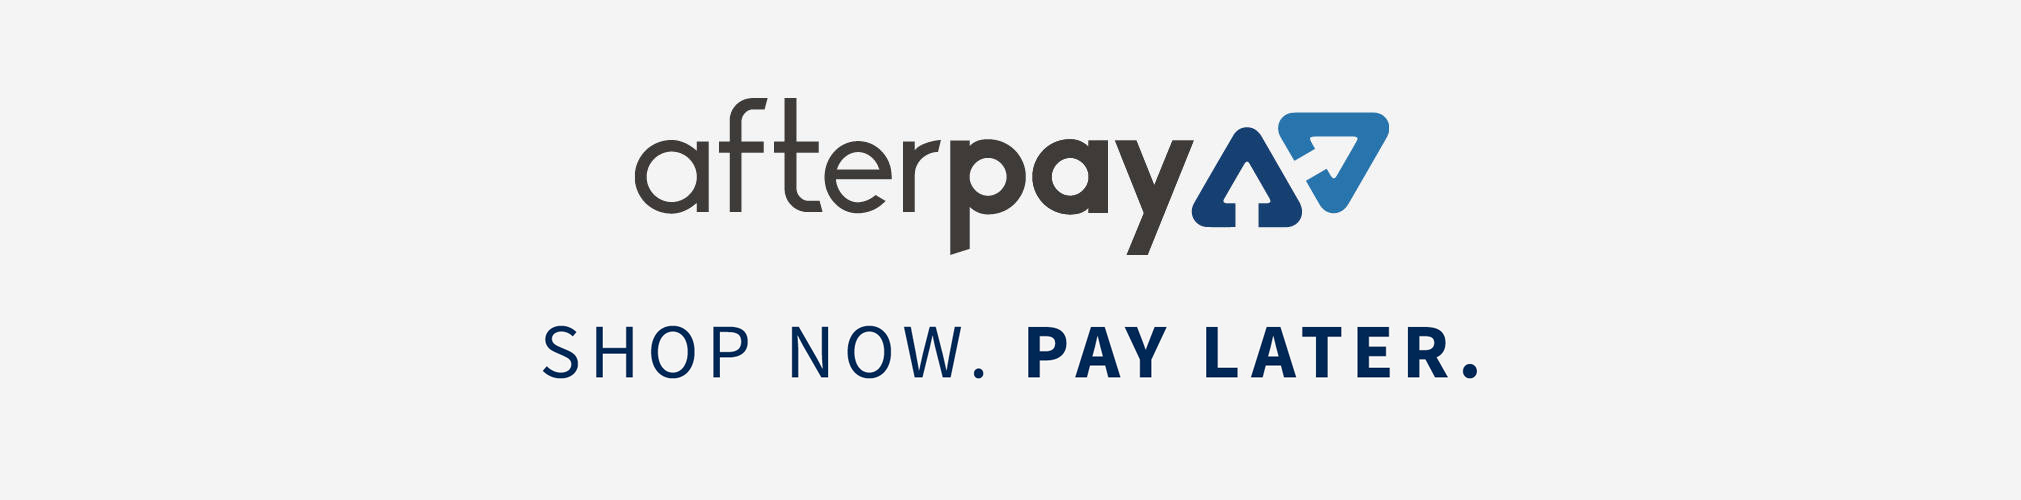 afterpay-banner.png